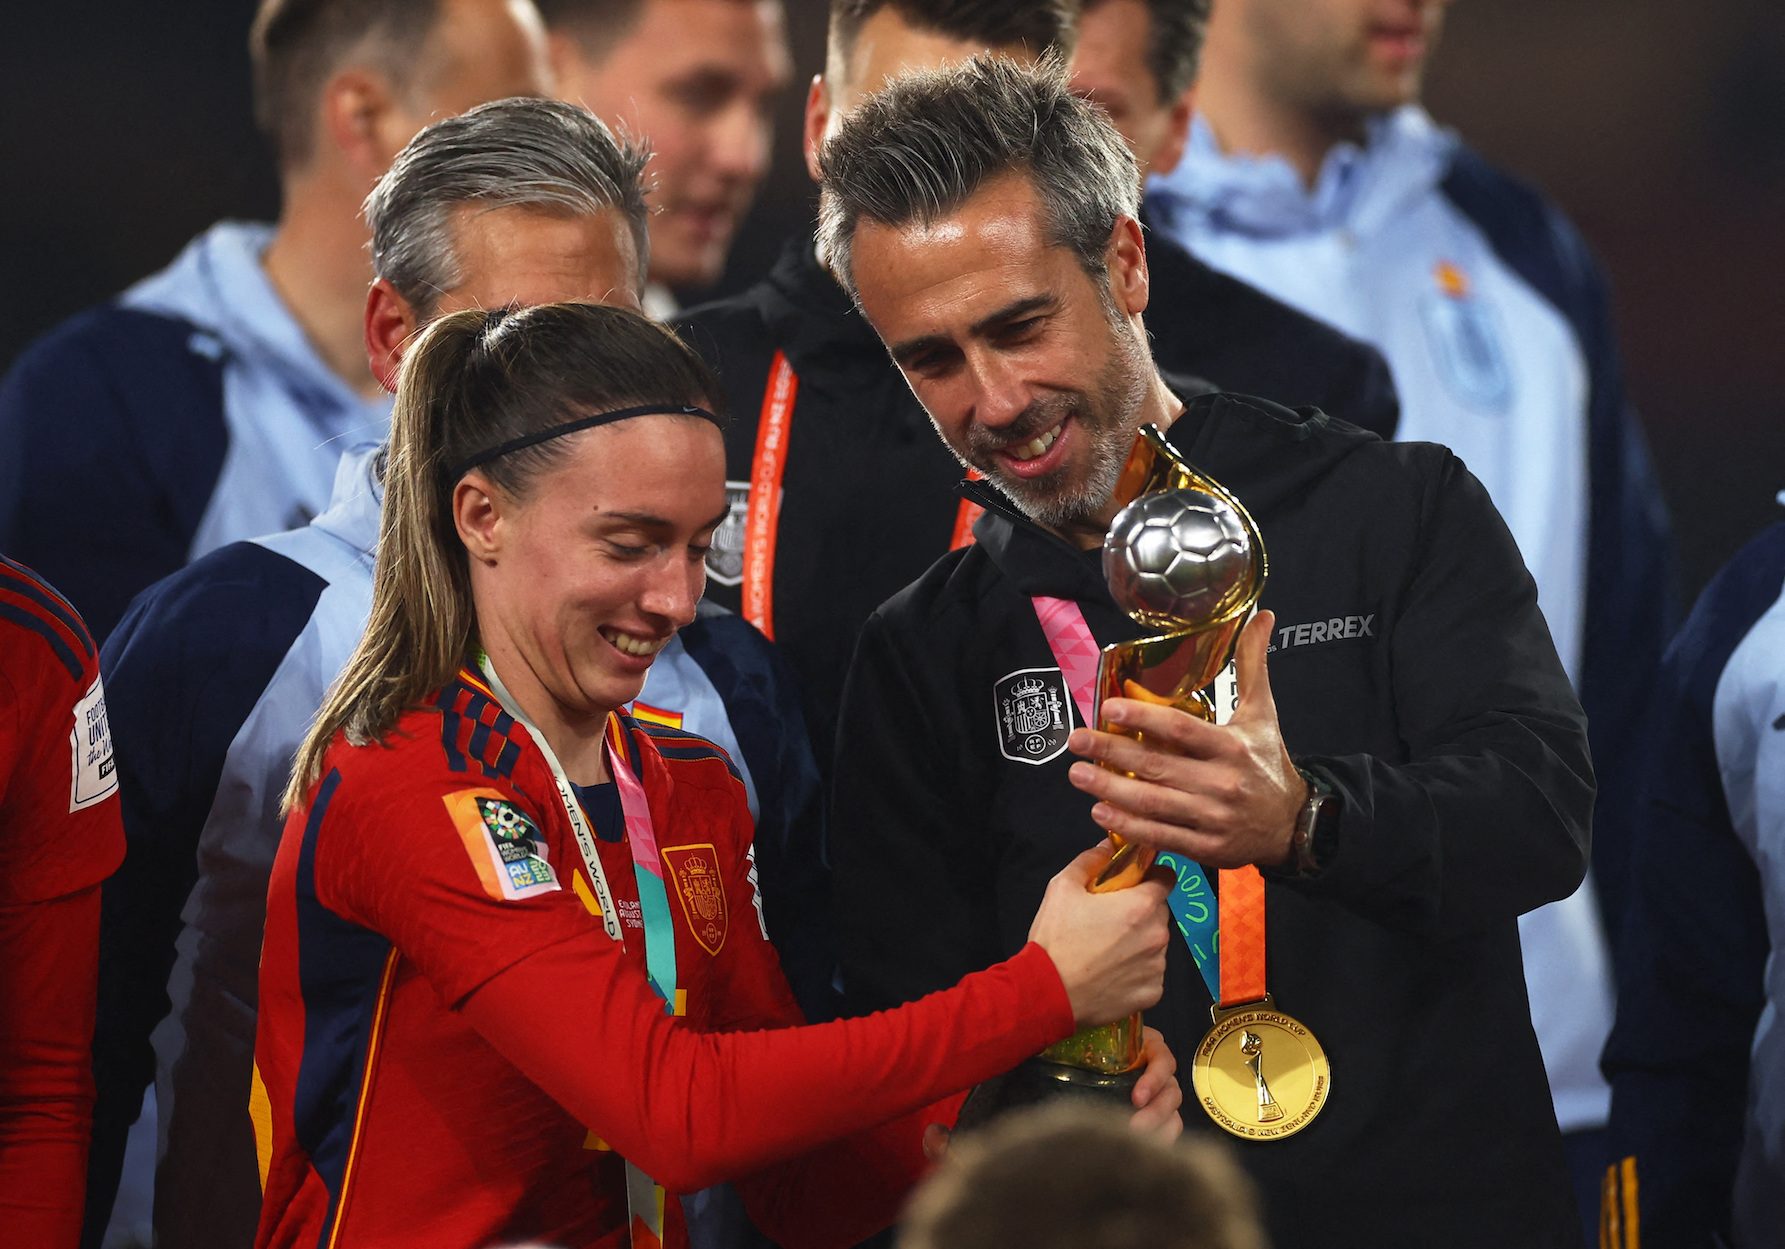 Spain coach Vilda fired after FIFA World Cup title romp